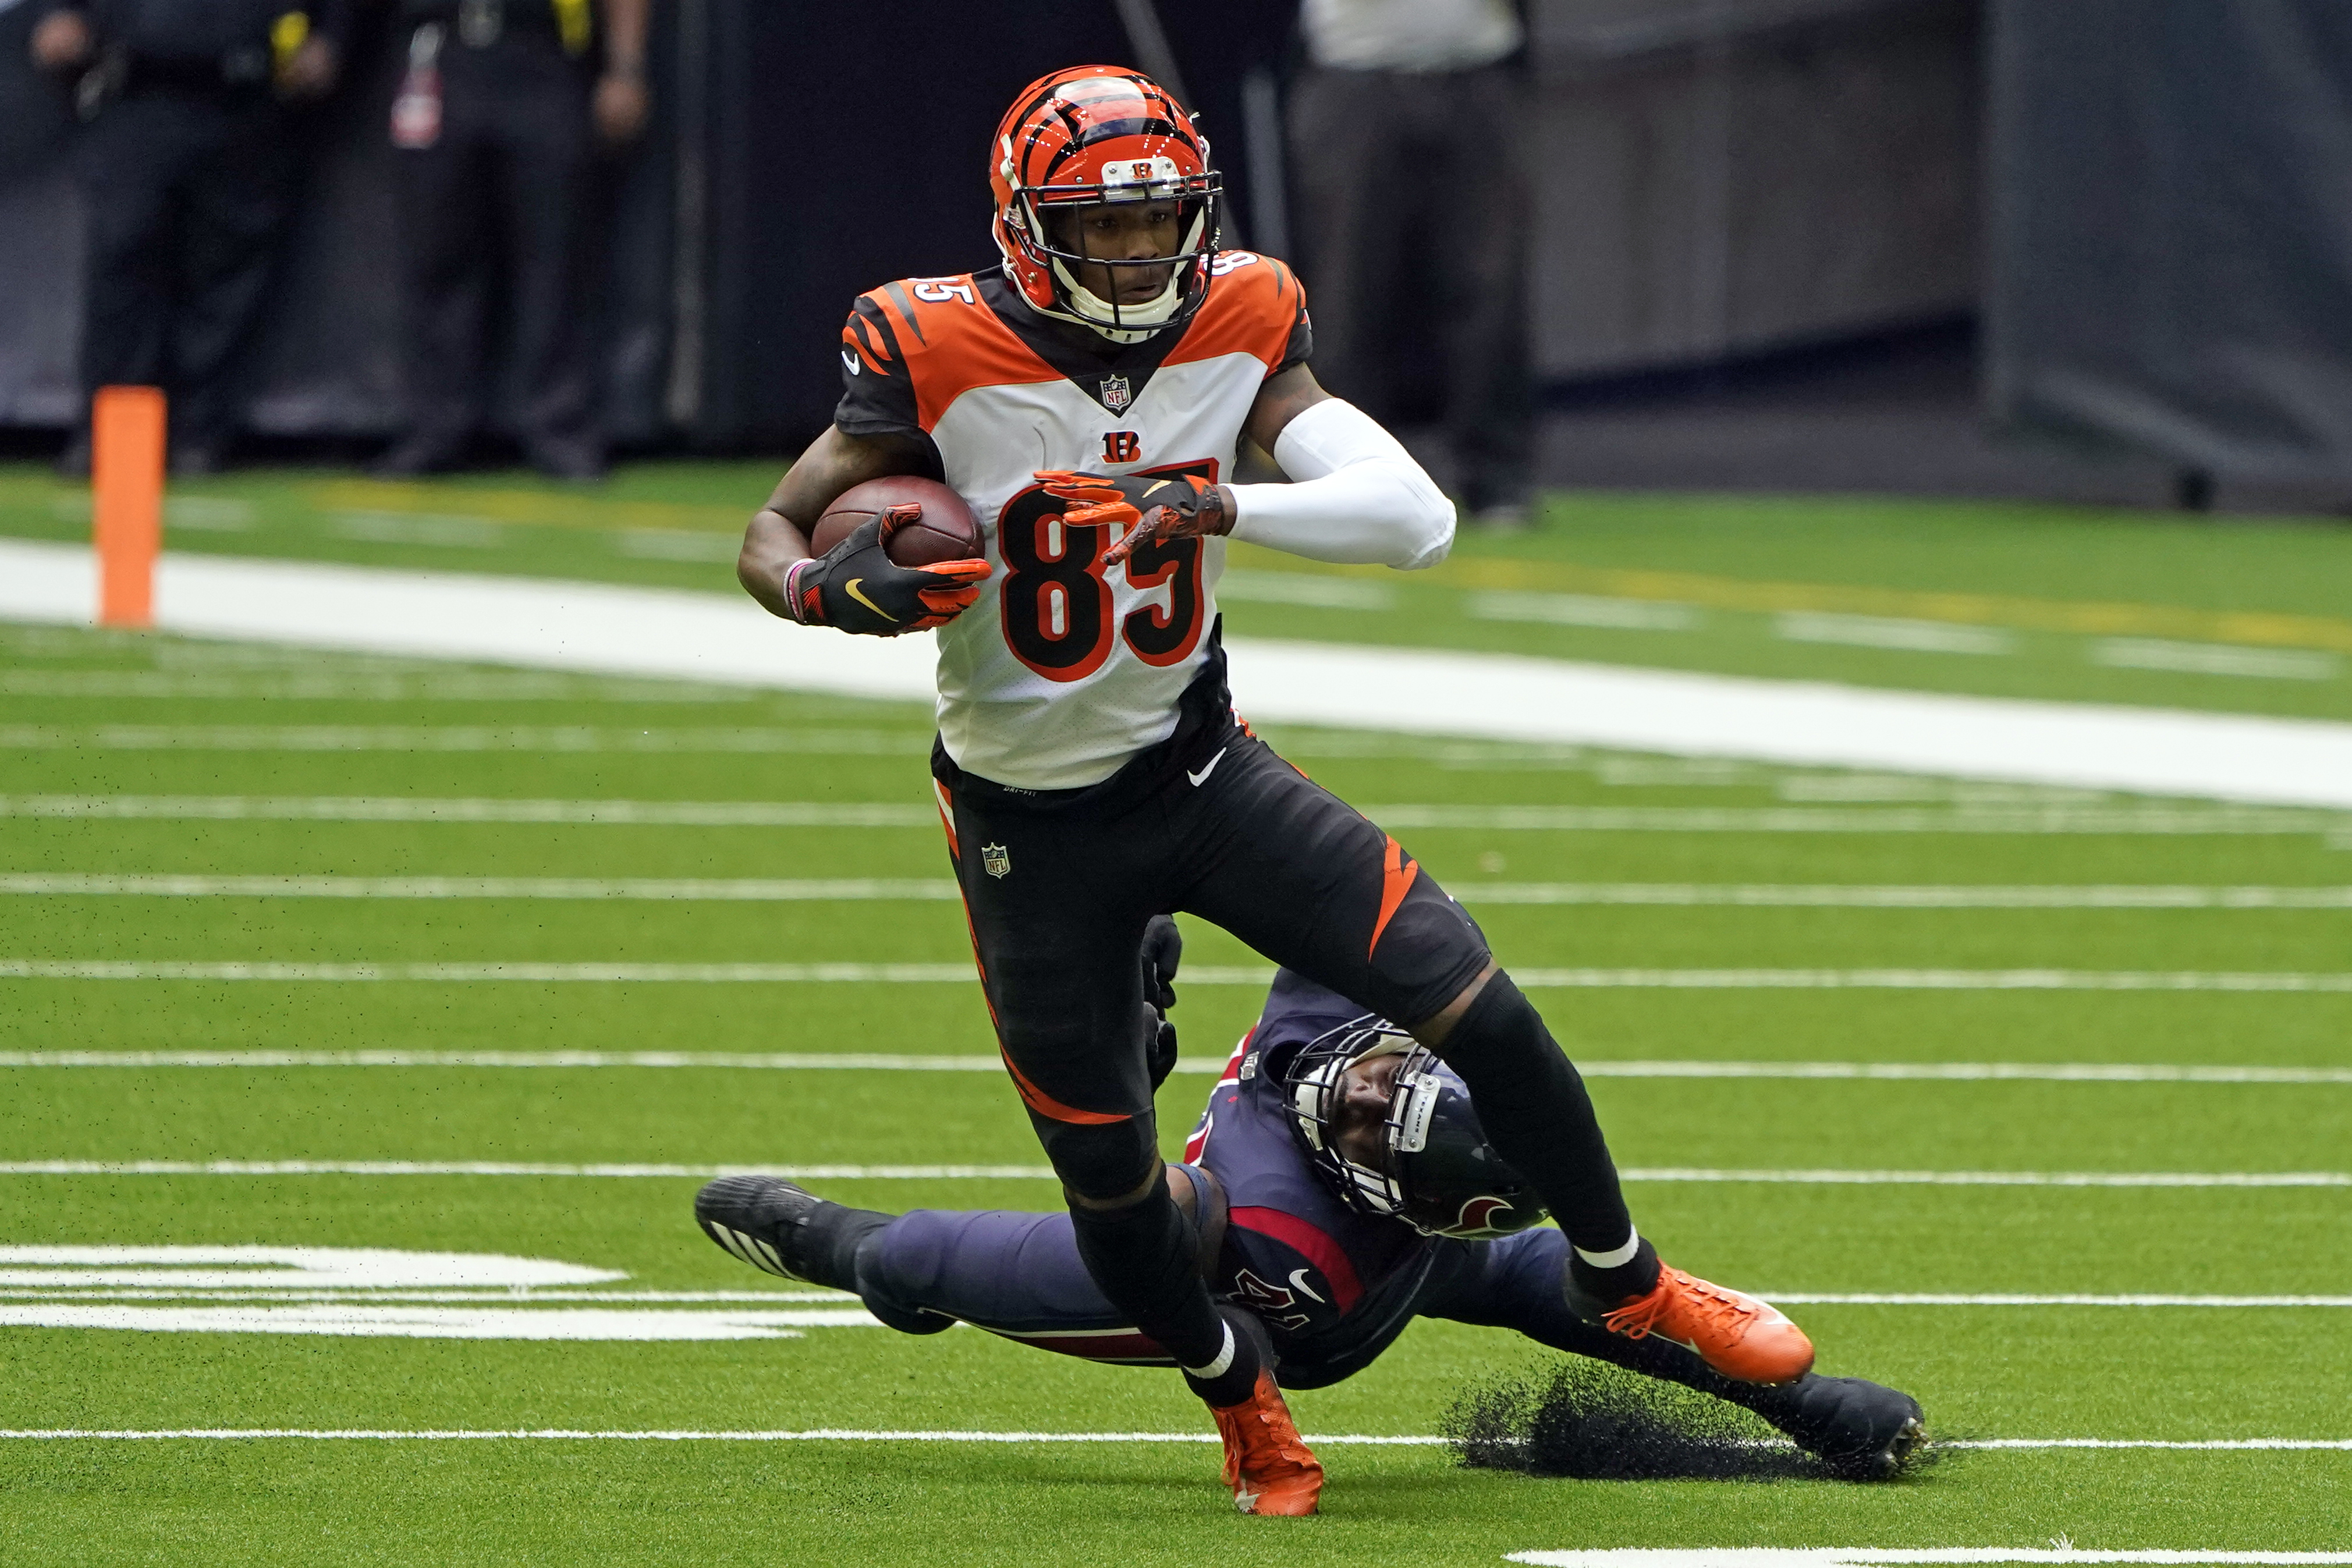 Chase and Higgins Shine in Bengals' Pass-Heavy Game